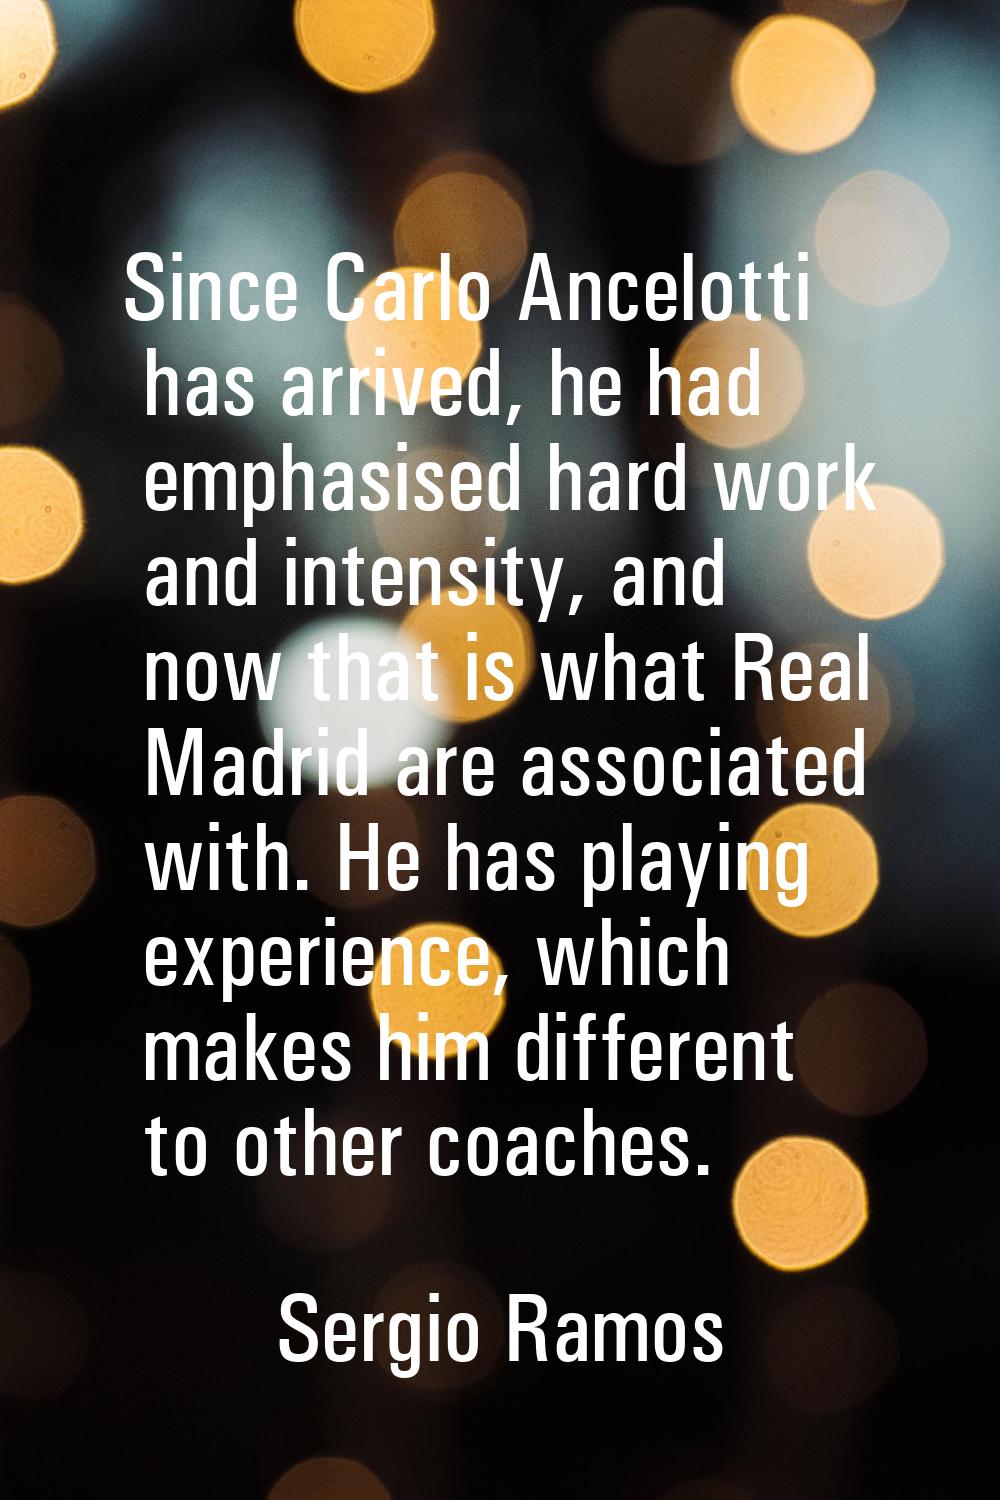 Since Carlo Ancelotti has arrived, he had emphasised hard work and intensity, and now that is what 